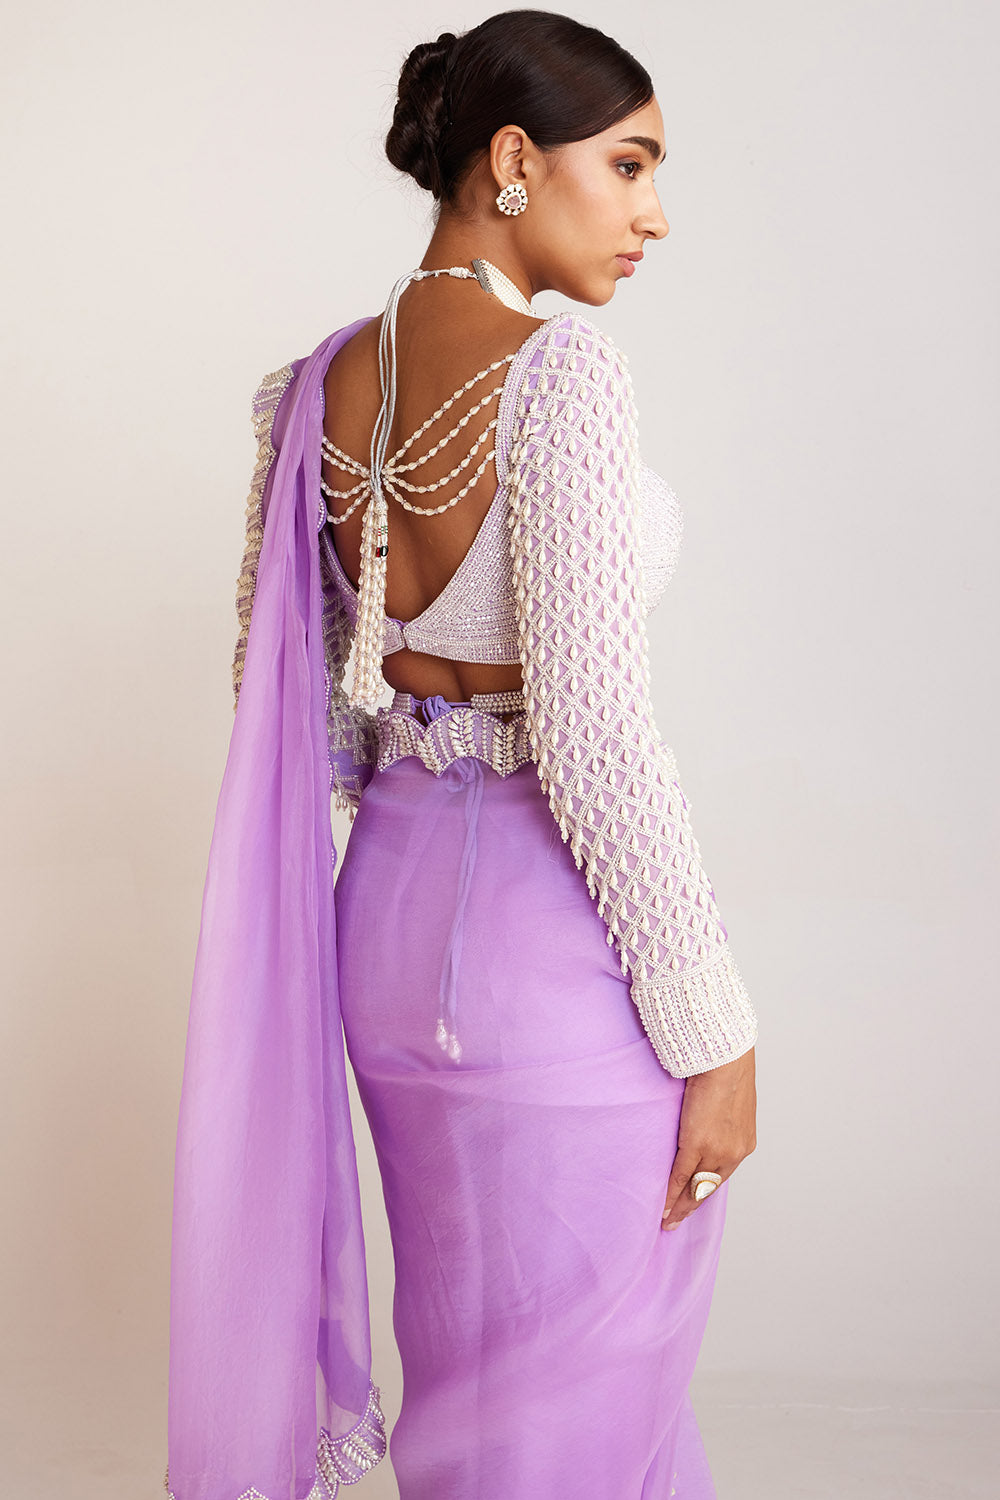 Lavender Saree with a pearl embellished waist belt #saree